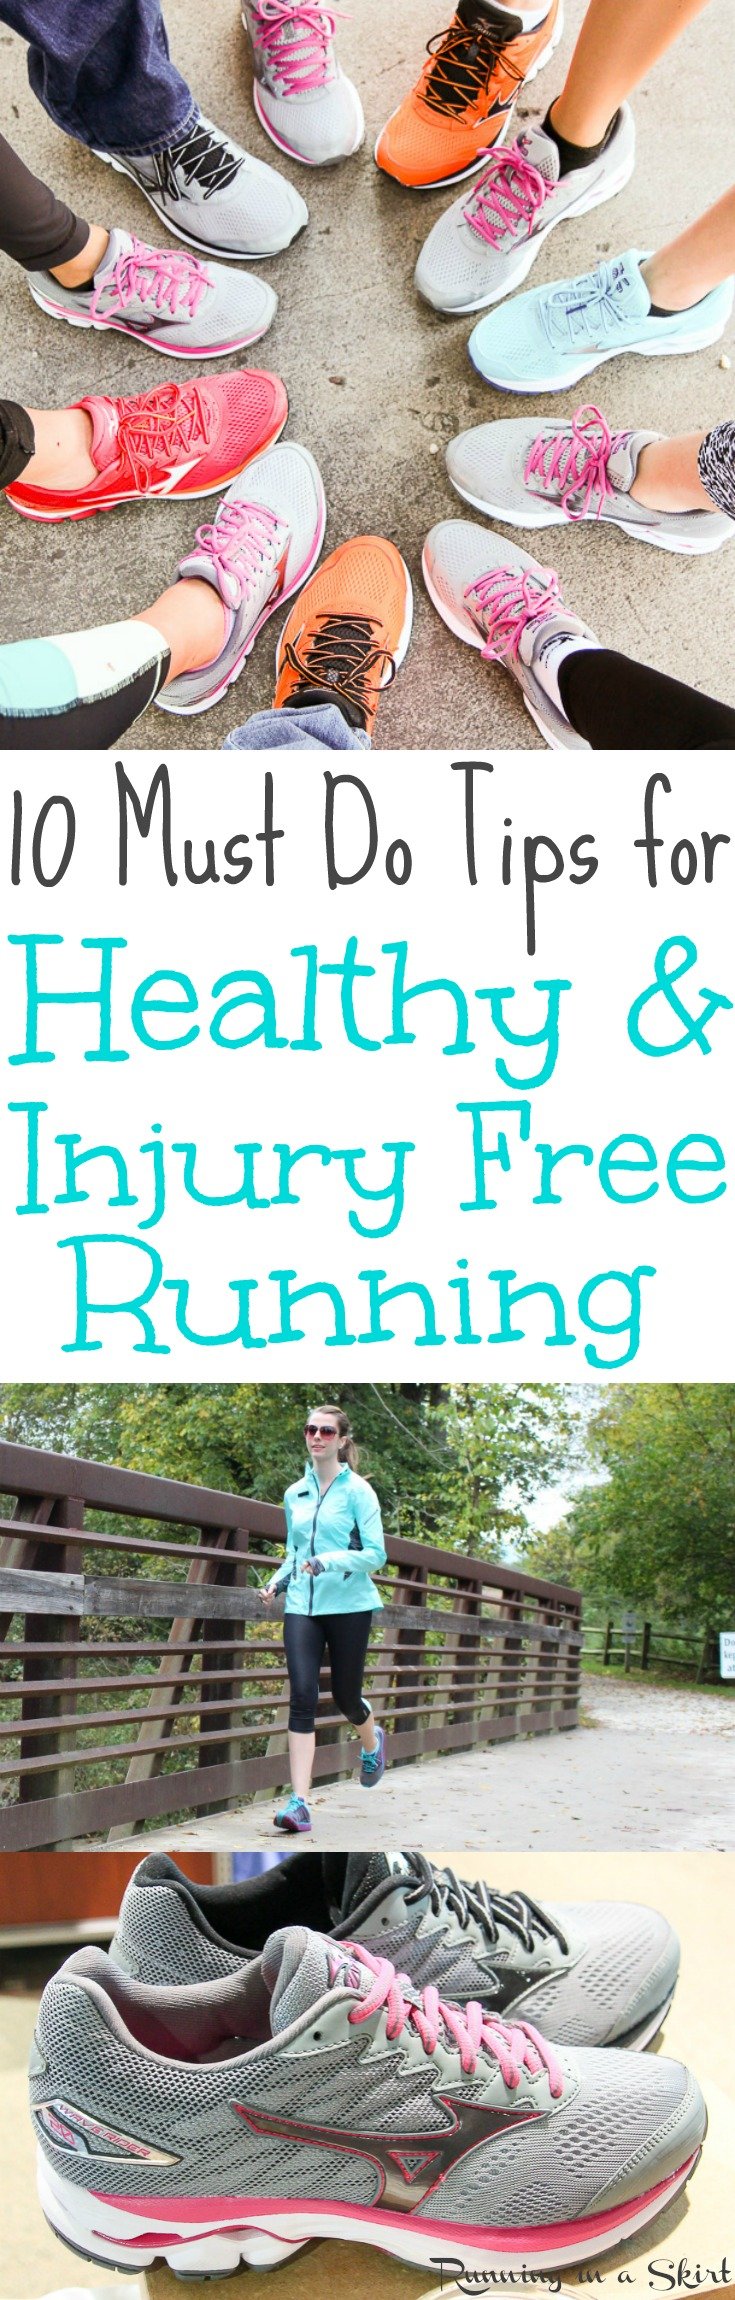 10 Must Do Tips for Healthy and Injury Free Running for life / Running in a Skirt